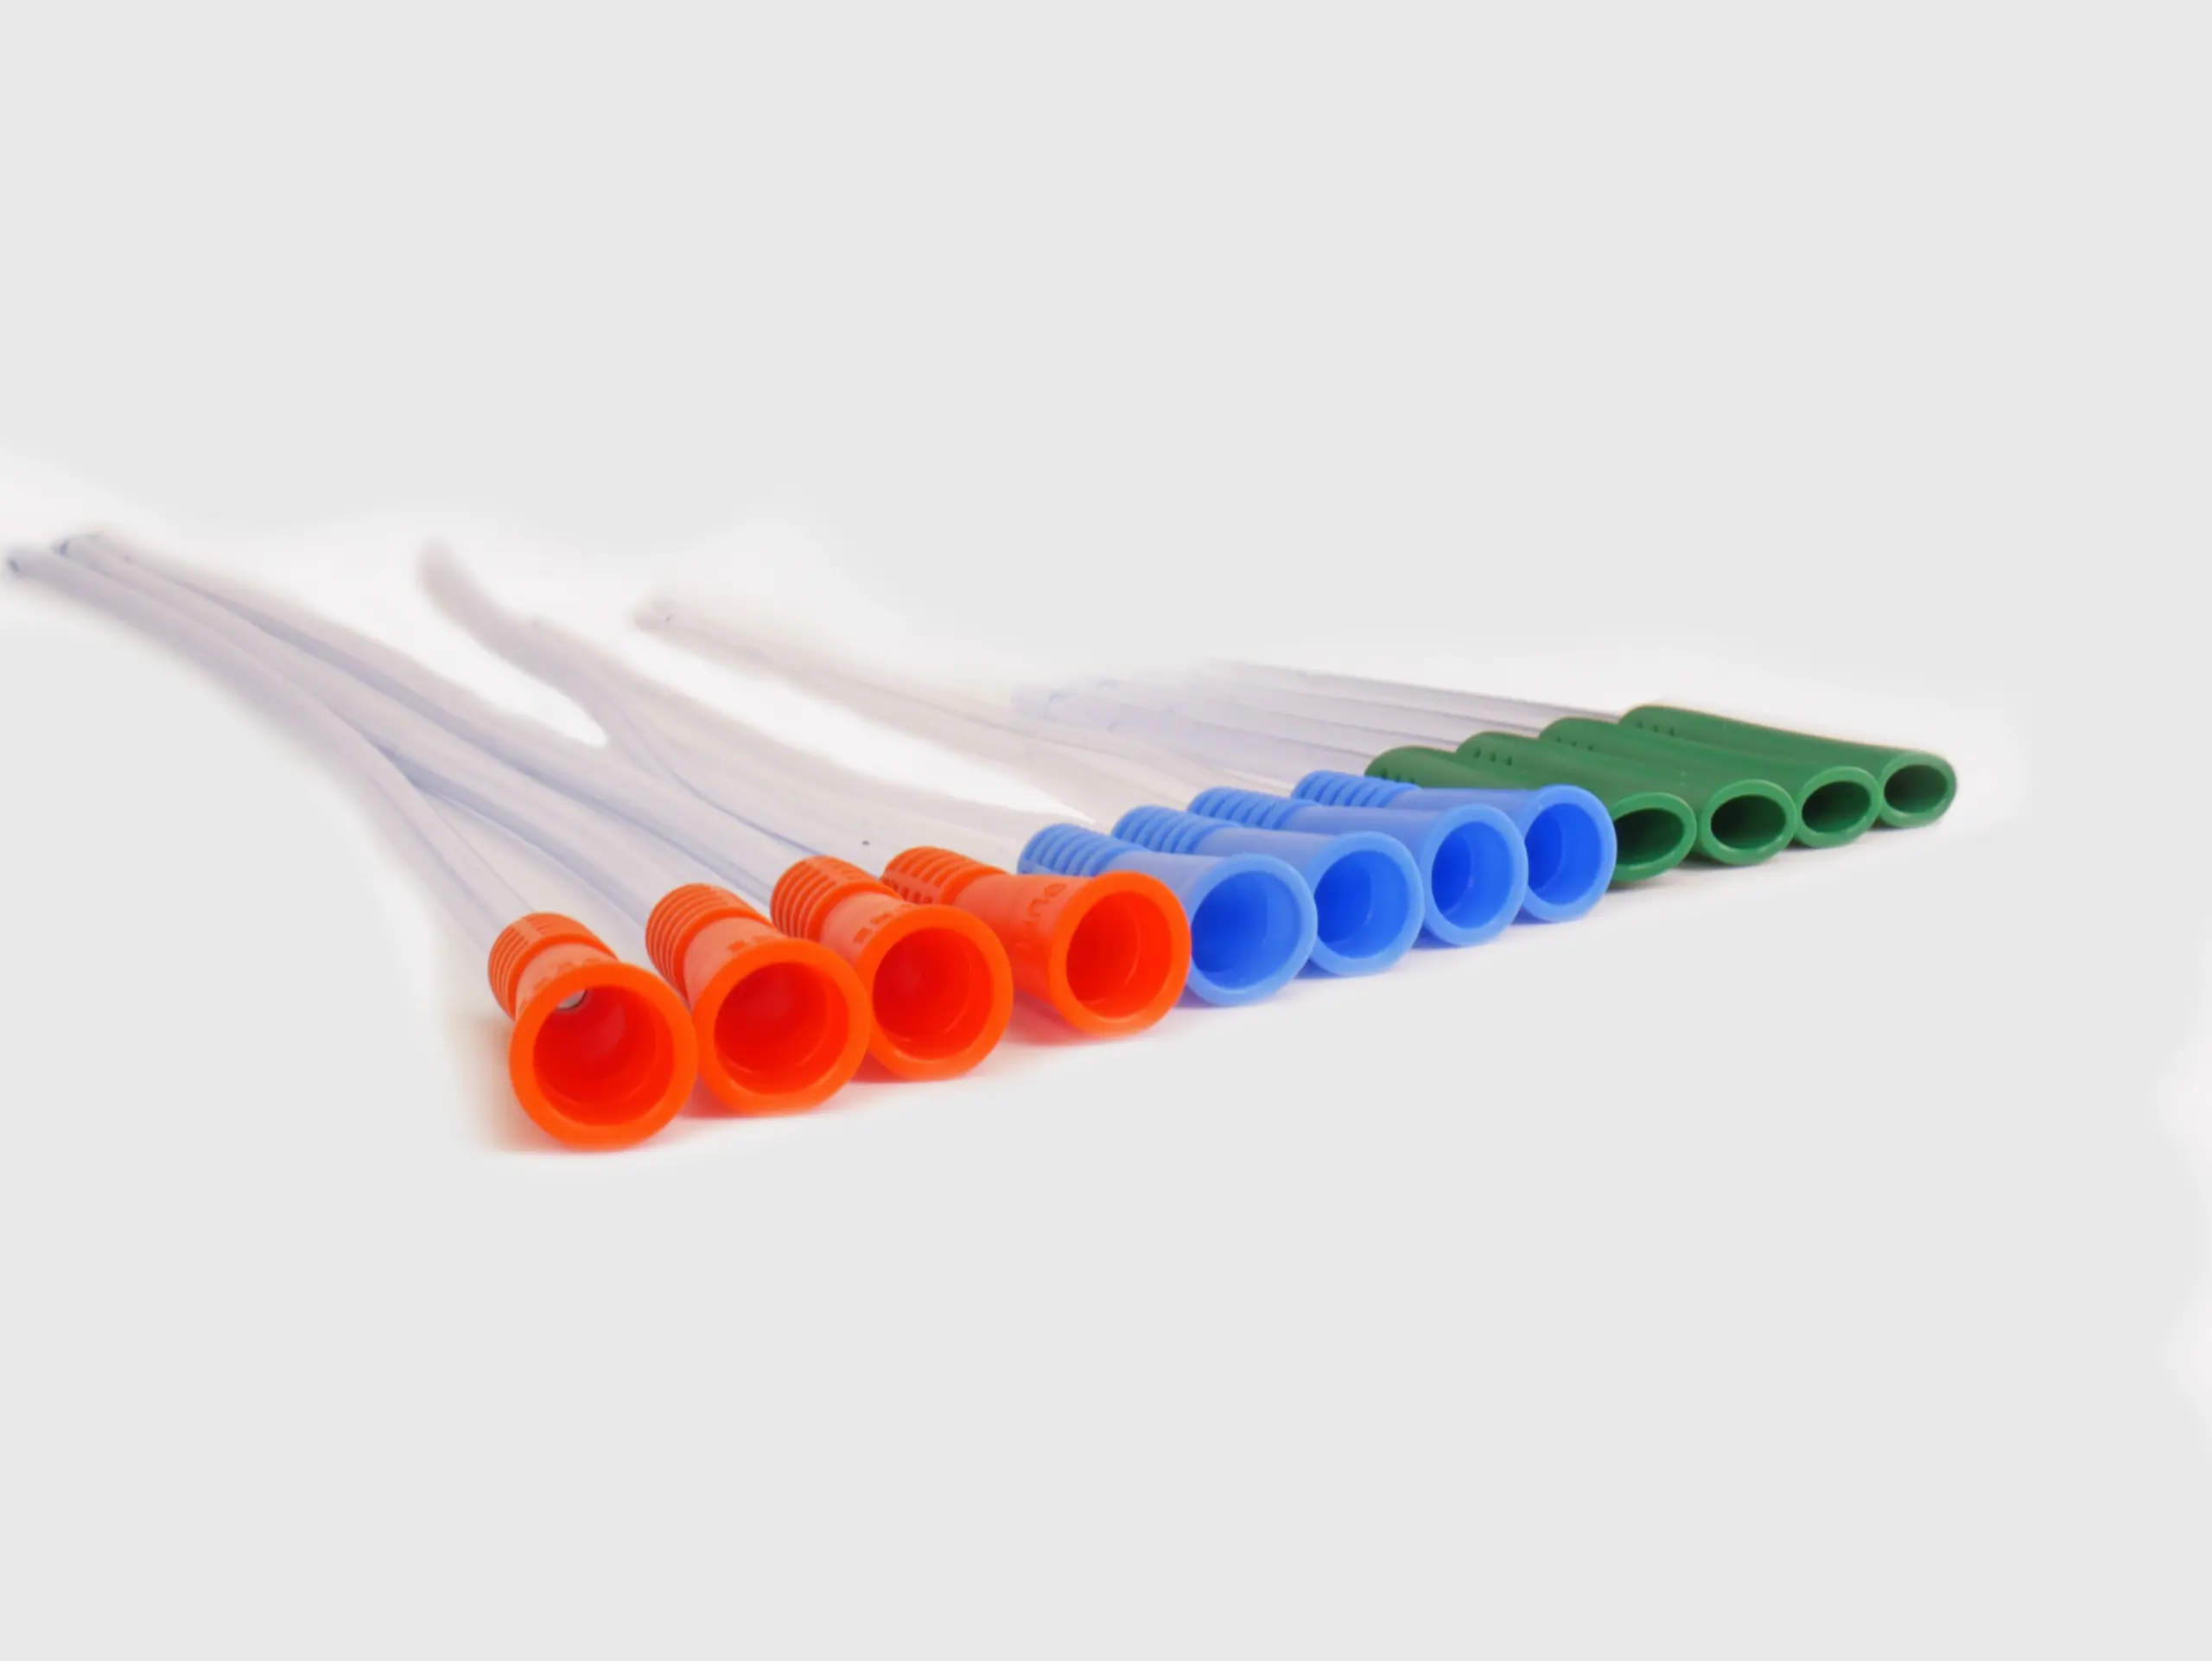 Photograph of an assortment of twelve RA Fischer Co. catheters of deferring lengths and gripper sleeve colors. The catheters are lined up. Grippers are facing camera. Gripper colors are blue green orange. White background [ Personalized urology care ]